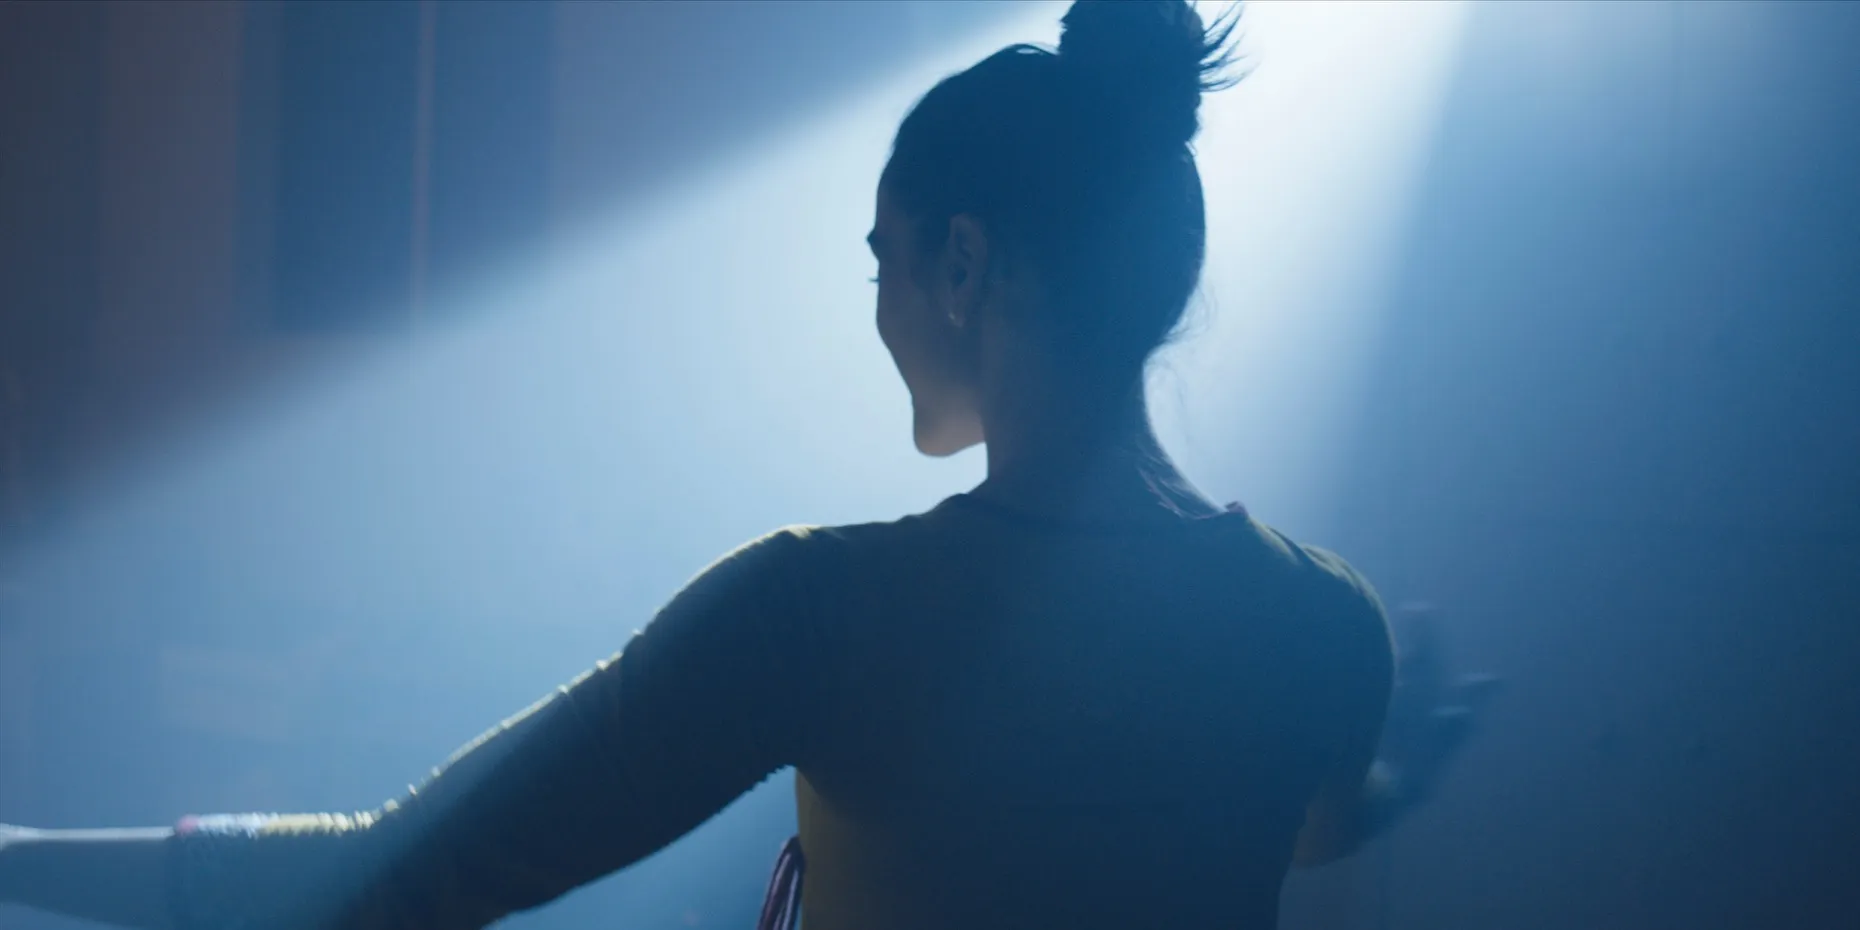 The back of a woman's head with her hair in a bun illuminated by blue light.